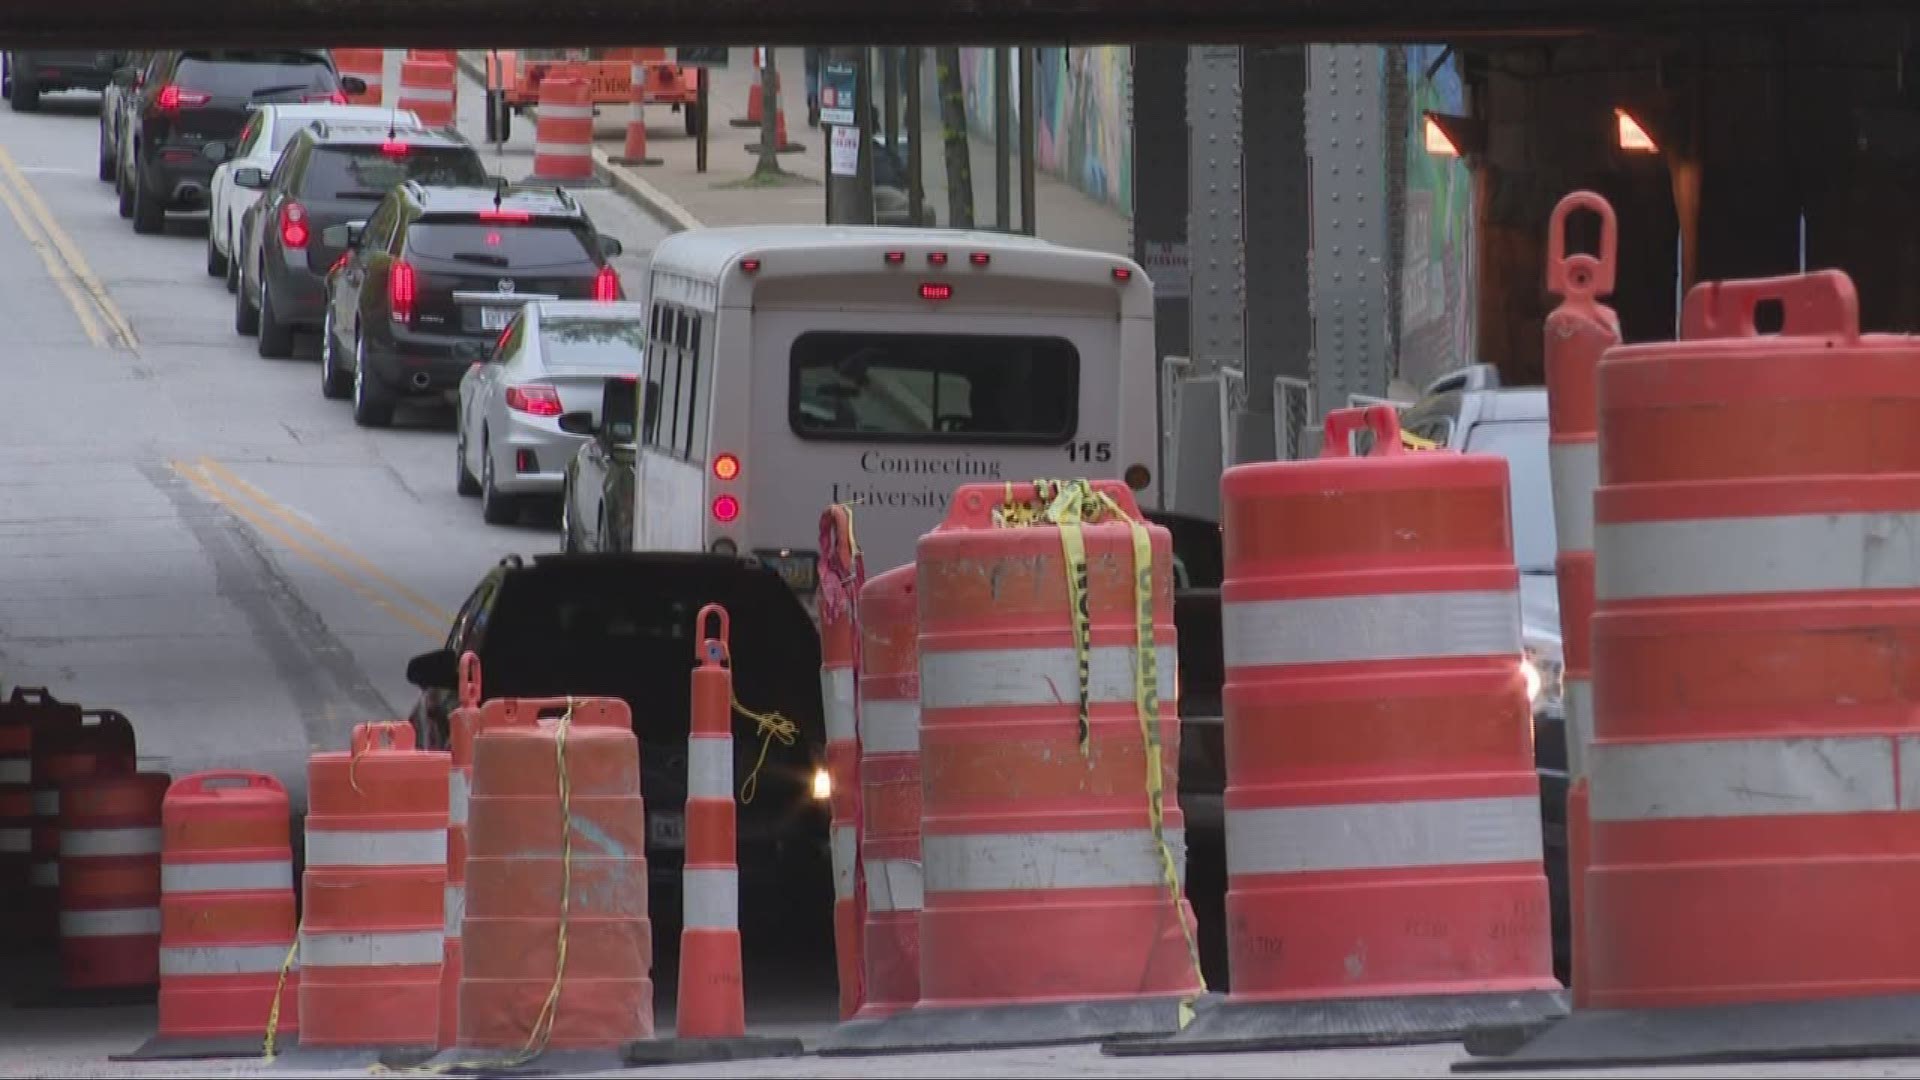 Construction will make things difficult for drivers in LIttle Italy